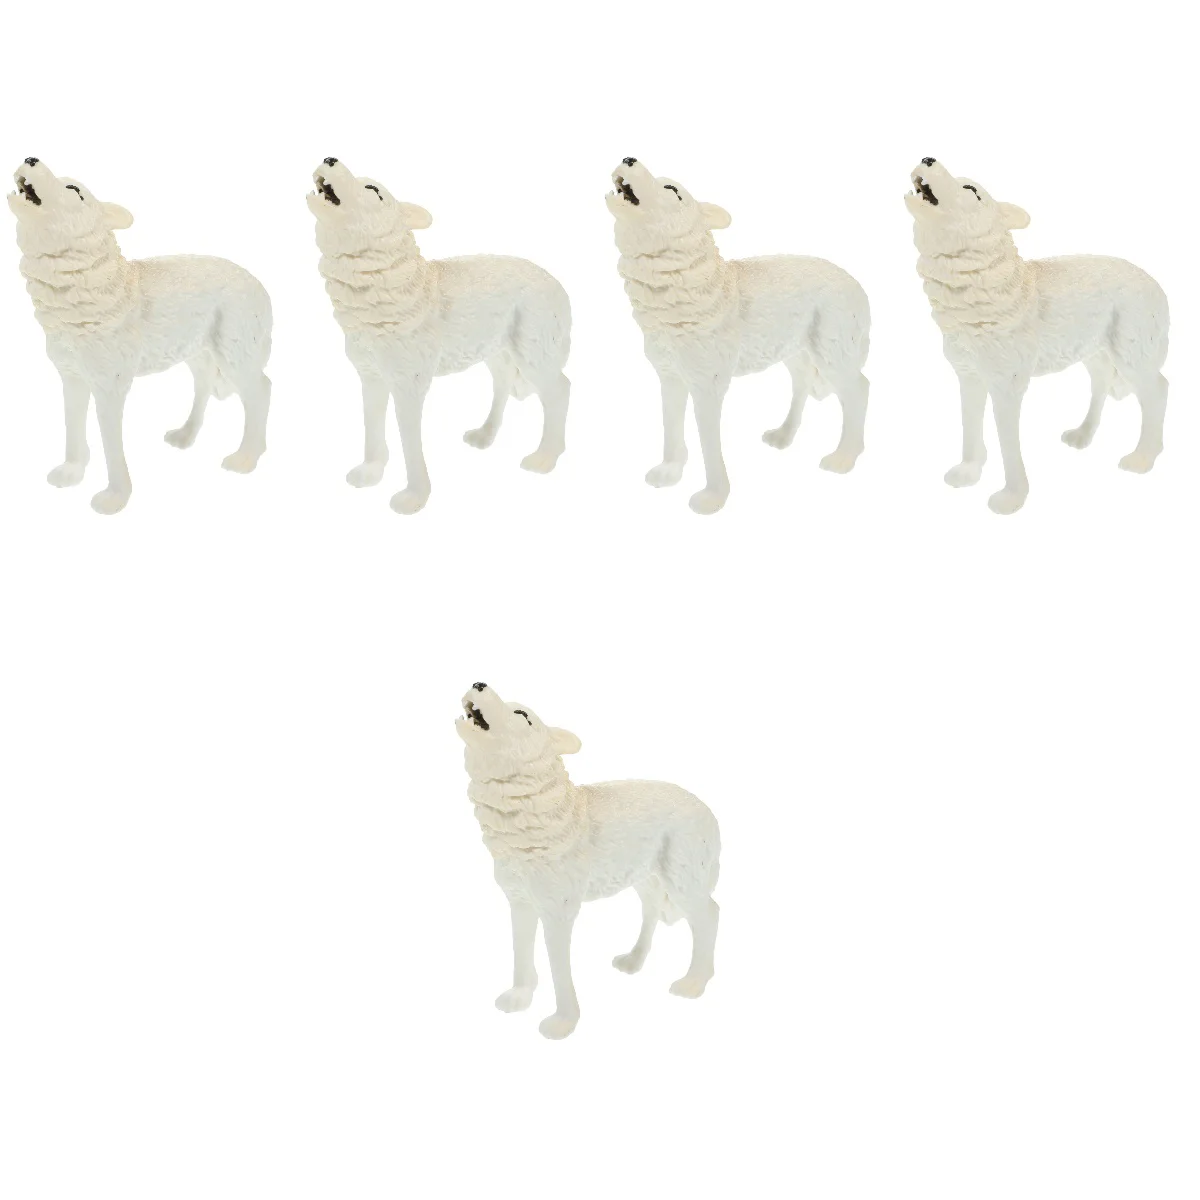 

5 PCS Wolf Model Toy Figurines Toddlers Plastic Playes Figures Decor Statue Models Kids Decorations Home Wildlife Animal